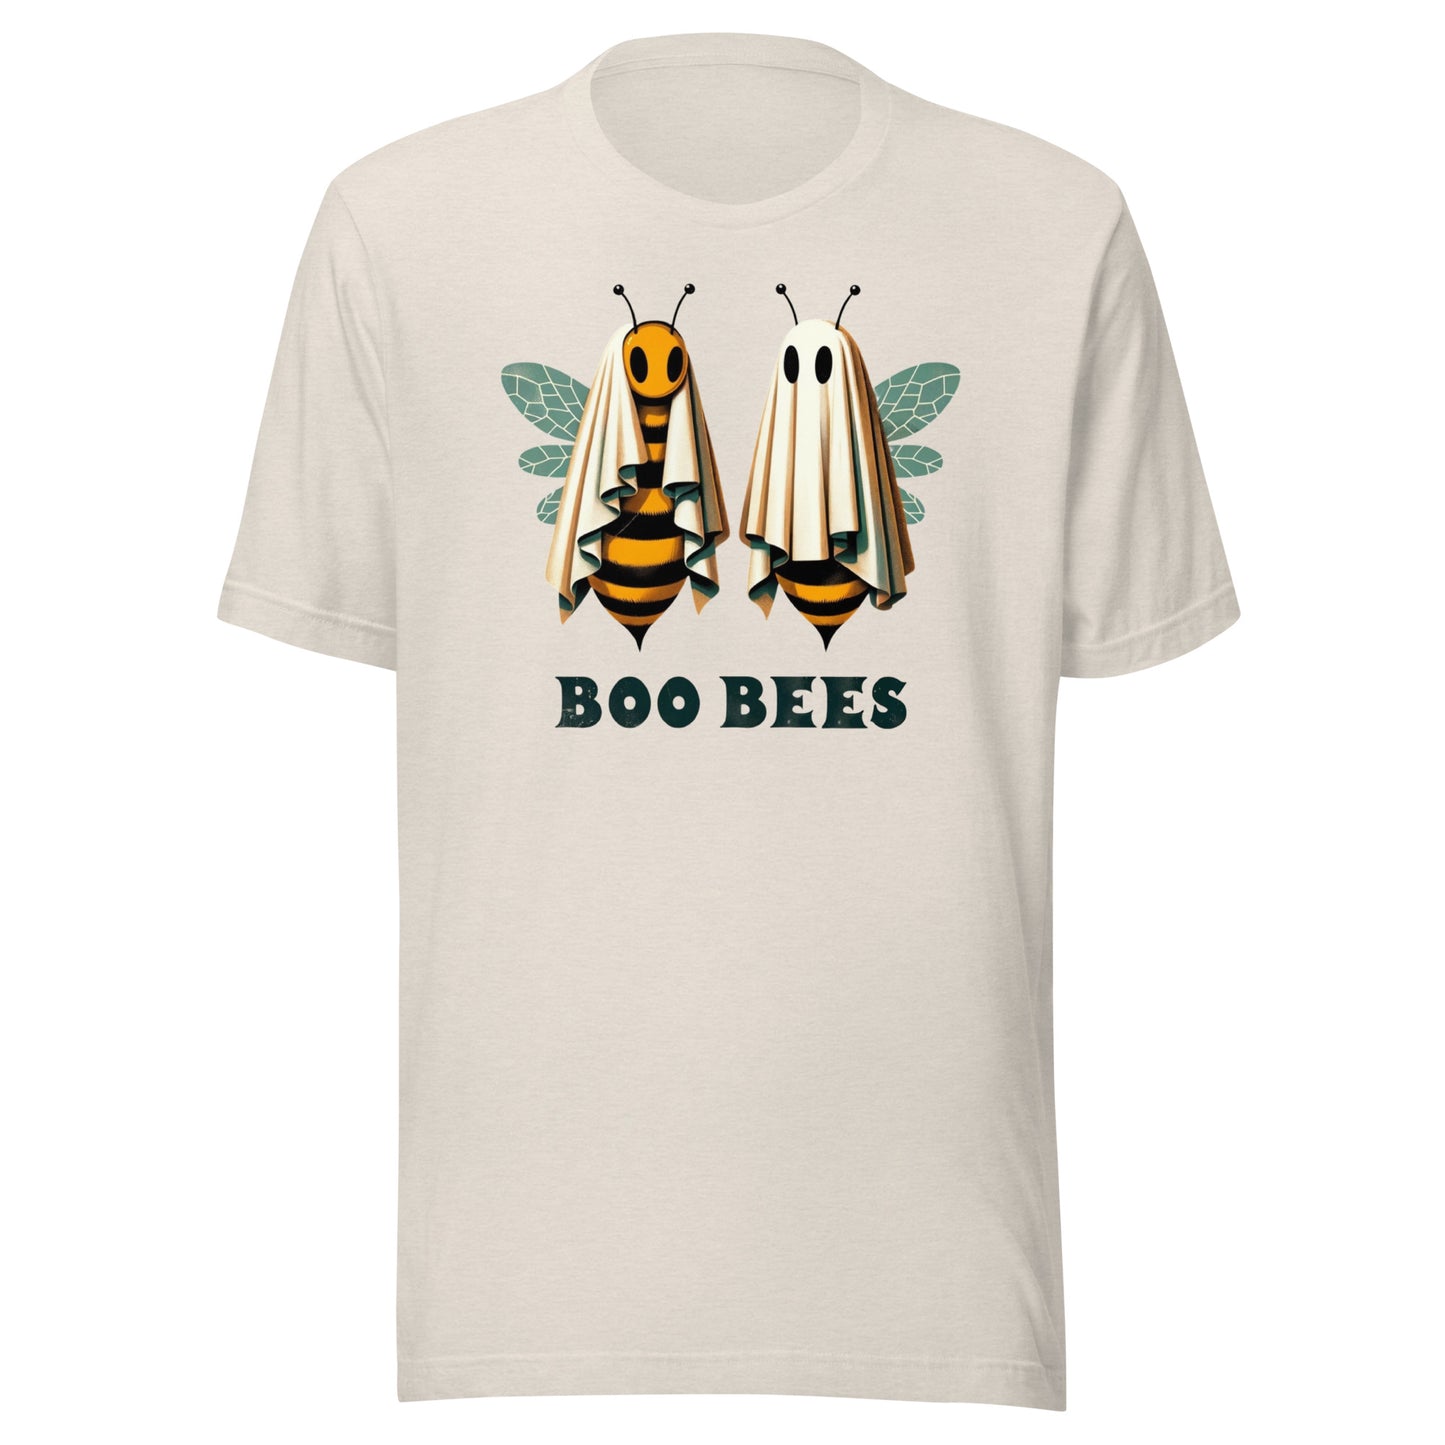 Boo Bees Halloween Ghost-Themed Graphic Unisex Tee